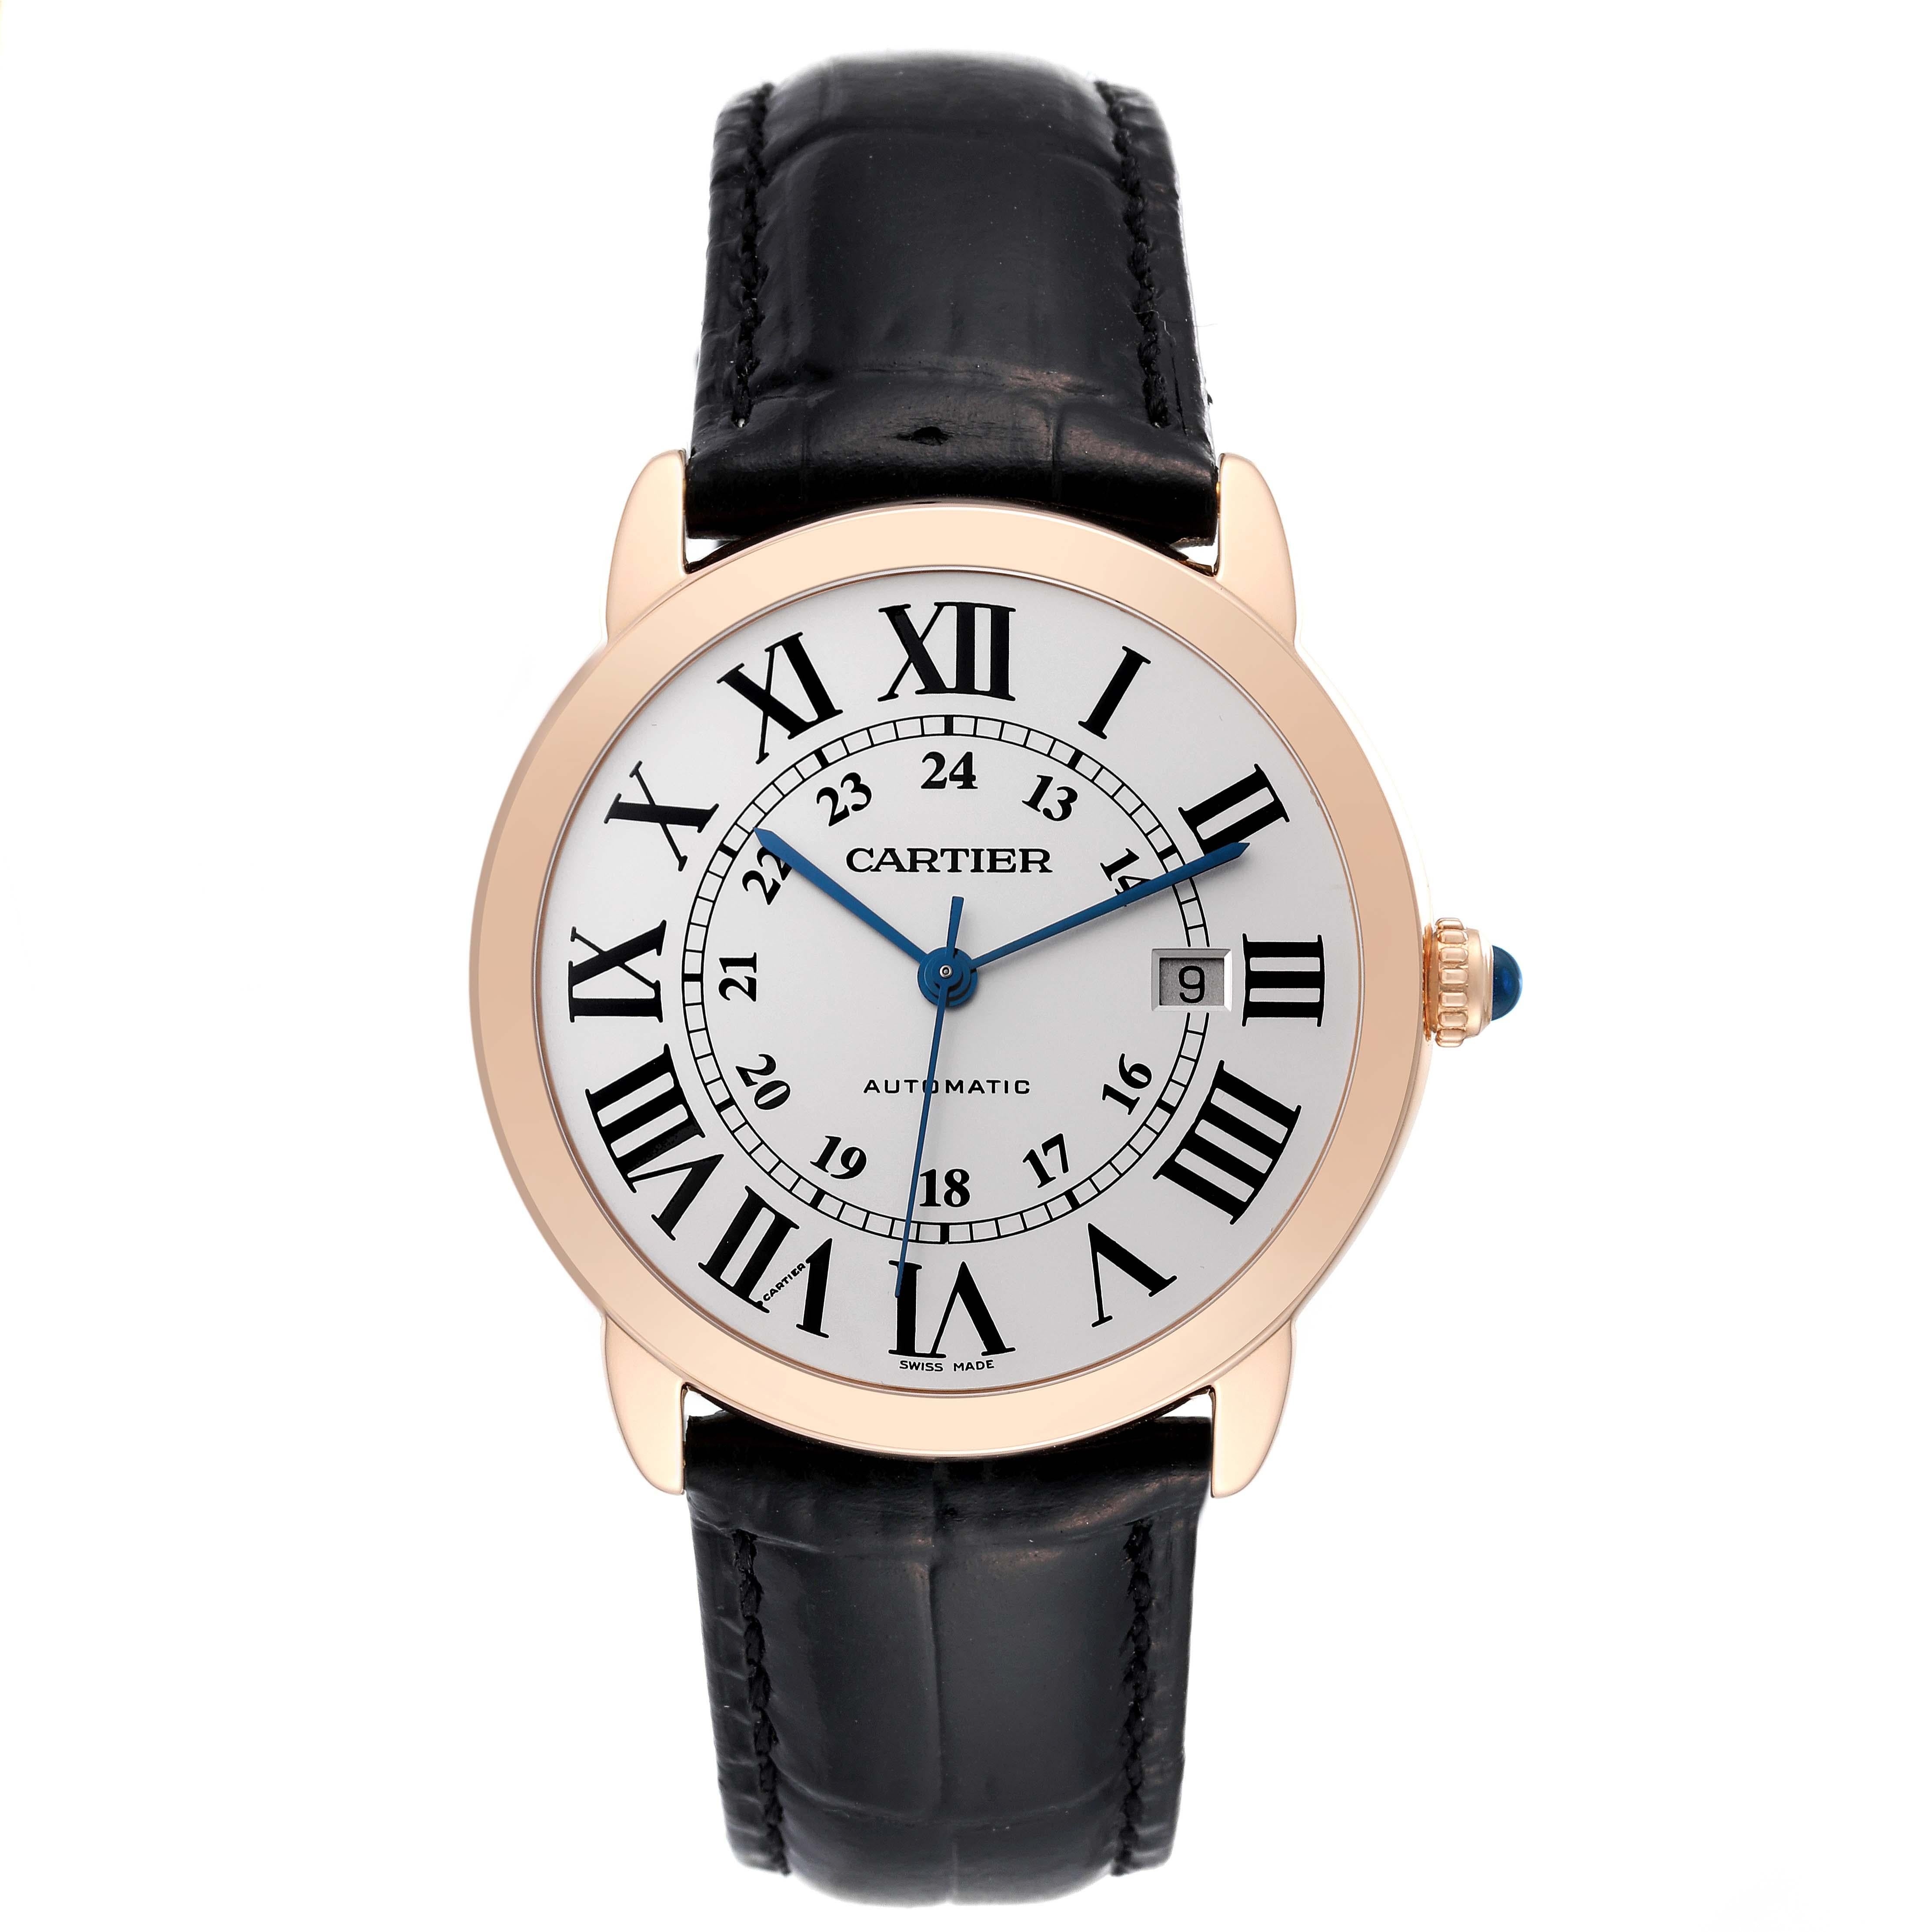 Cartier Ronde Solo XL Automatic Rose Gold Steel Mens Watch W6701009. Automatic self-winding movement. 18K rose gold case 42.0 mm in diameter. Stainless steel case back. Circular grained crown set with a blue spinel cabochon. . Scratch resistant